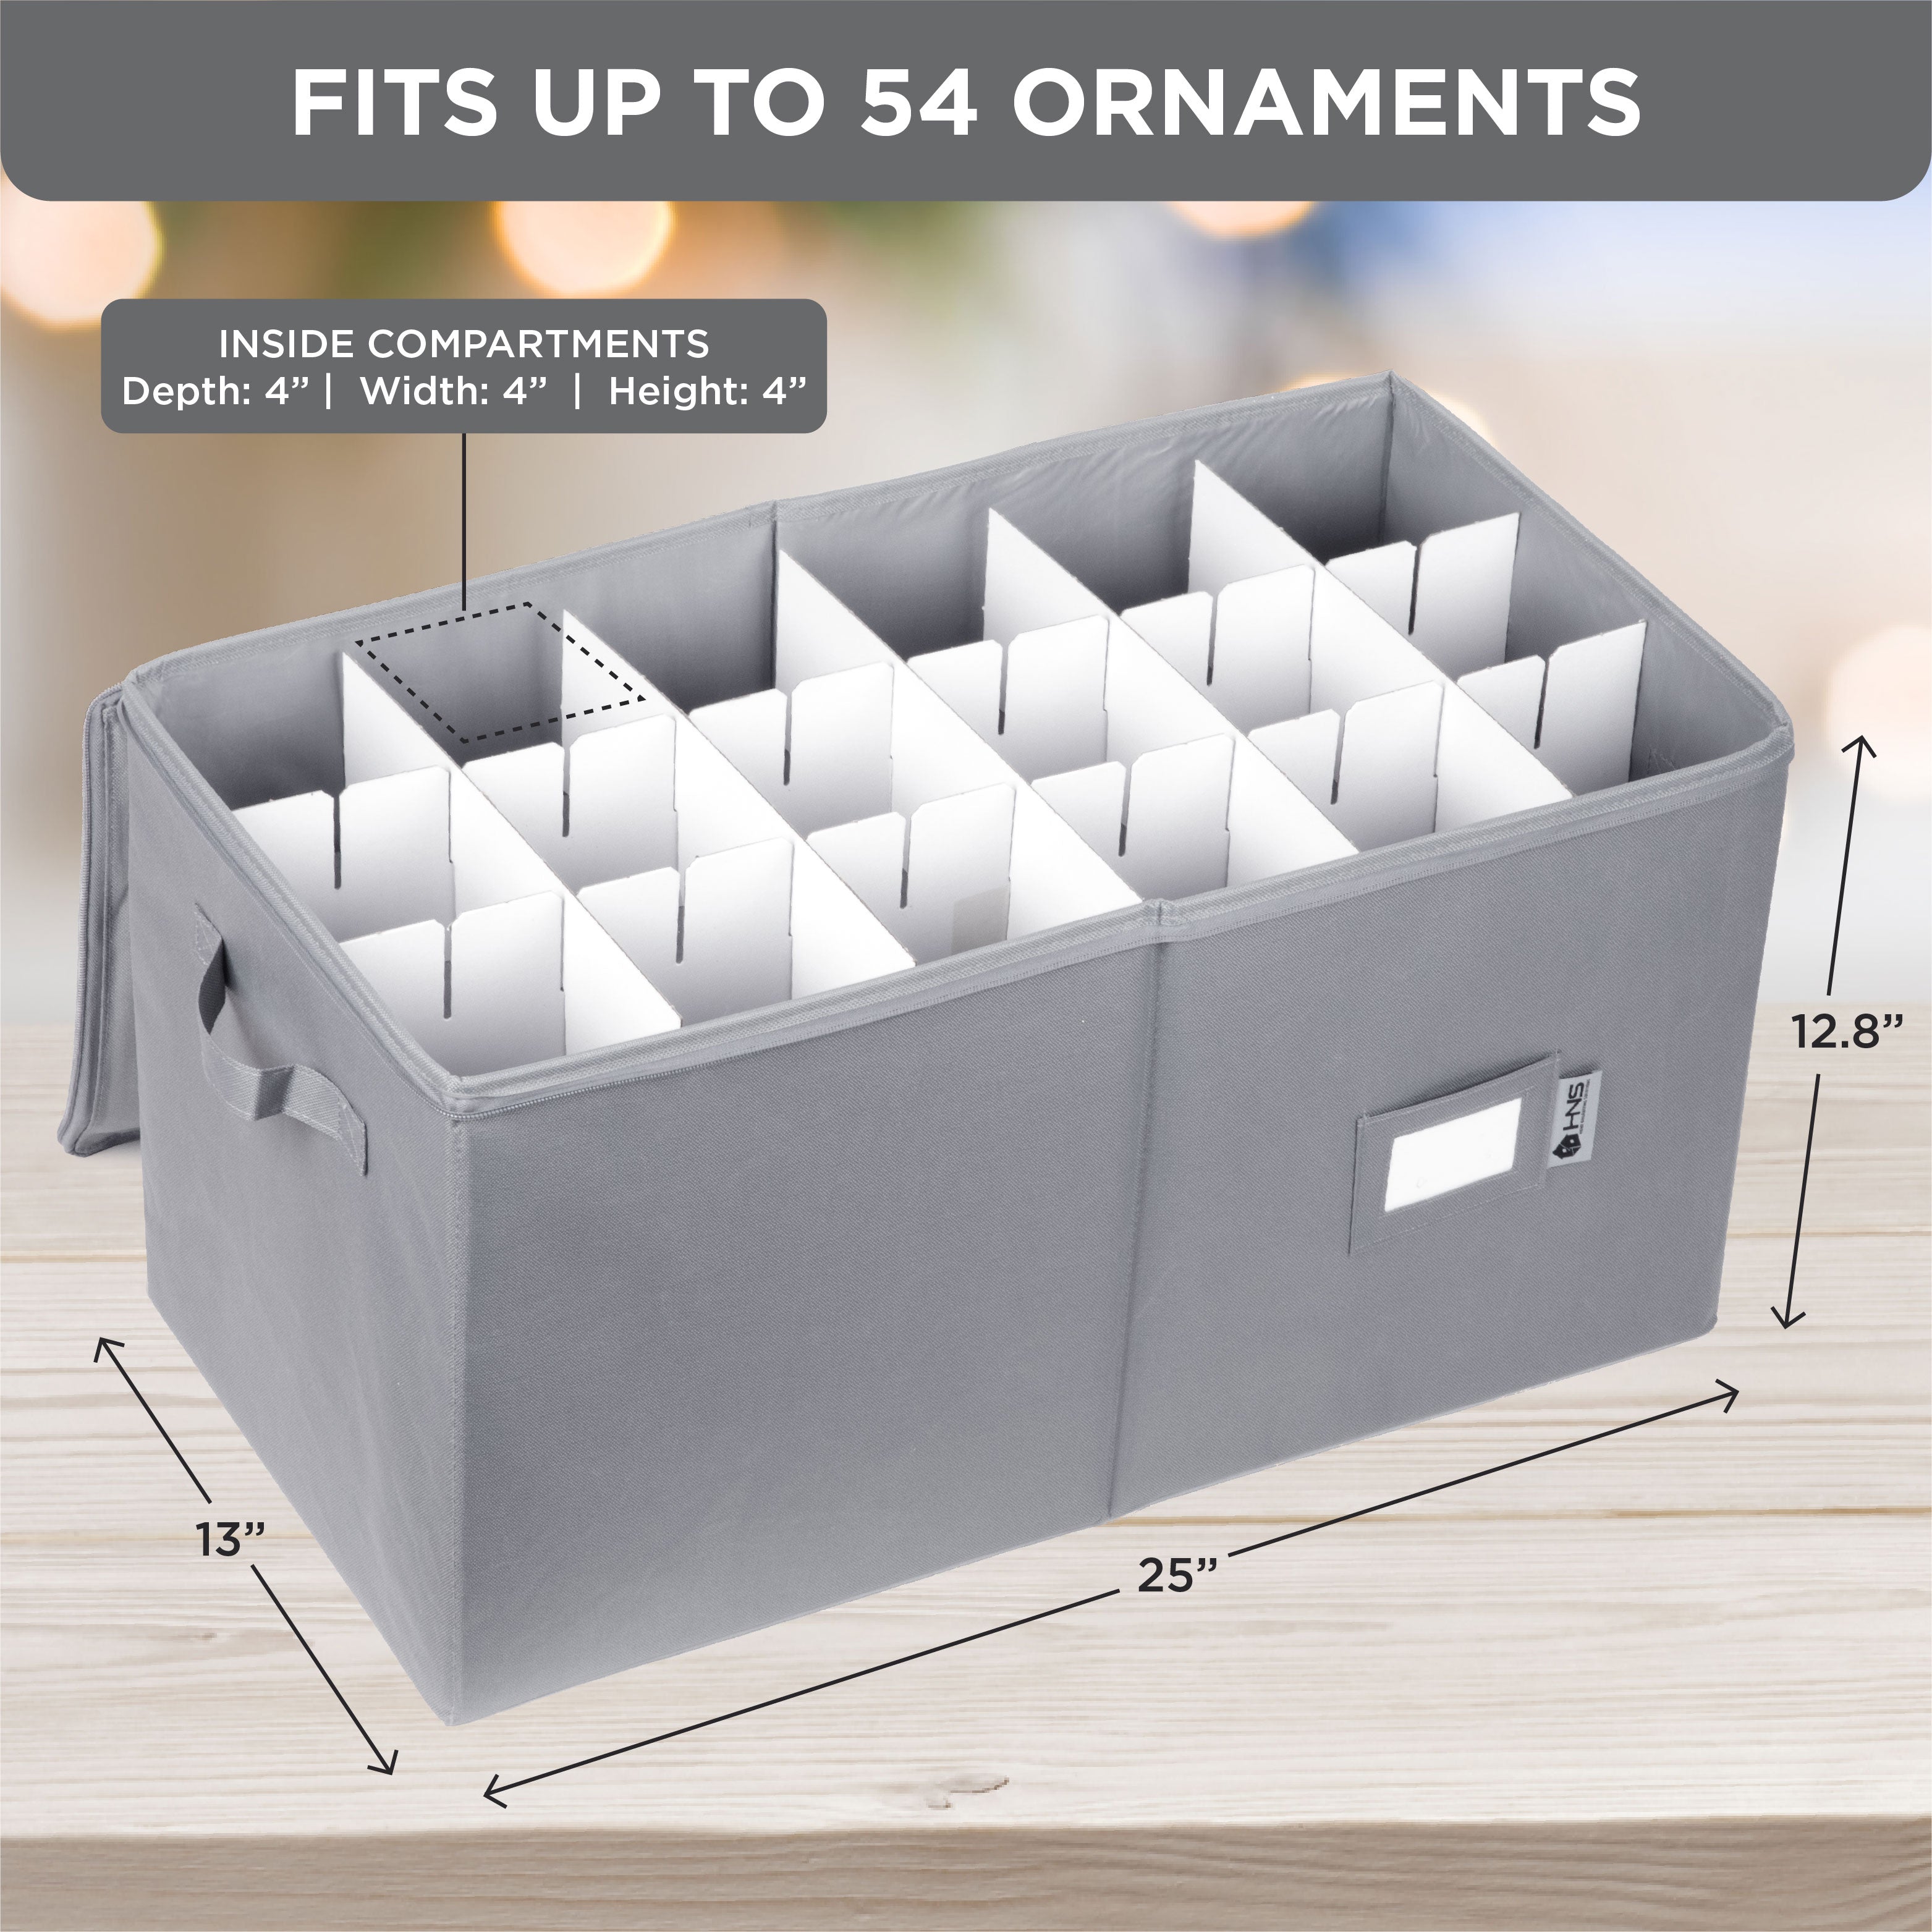 Rubbermaid Ornament Storage Low Profile Holds 40 Ornaments Collapsible  30x5x18in